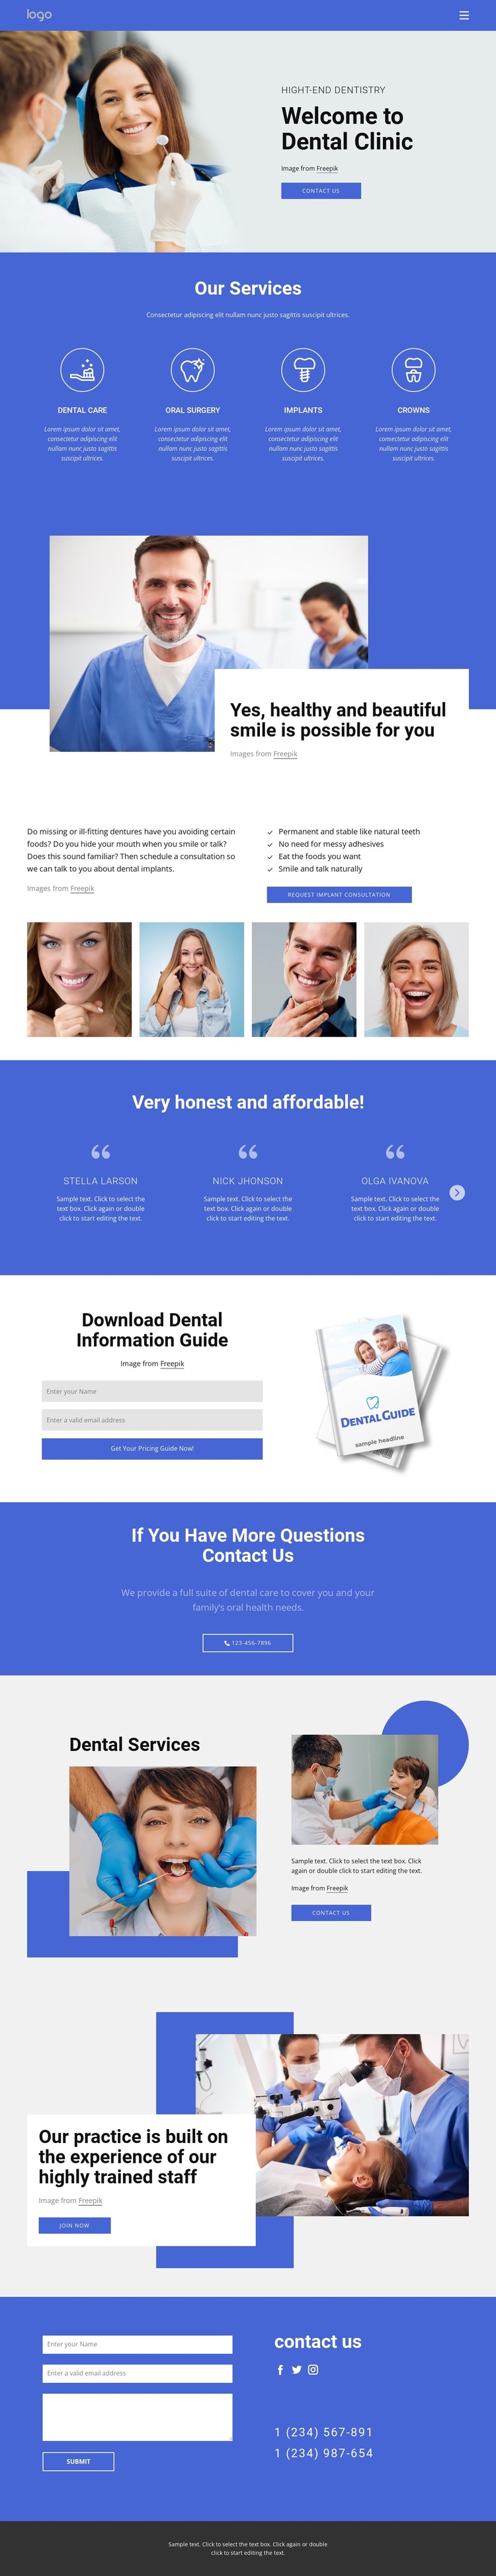 Welcome to dental clinic Joomla Template